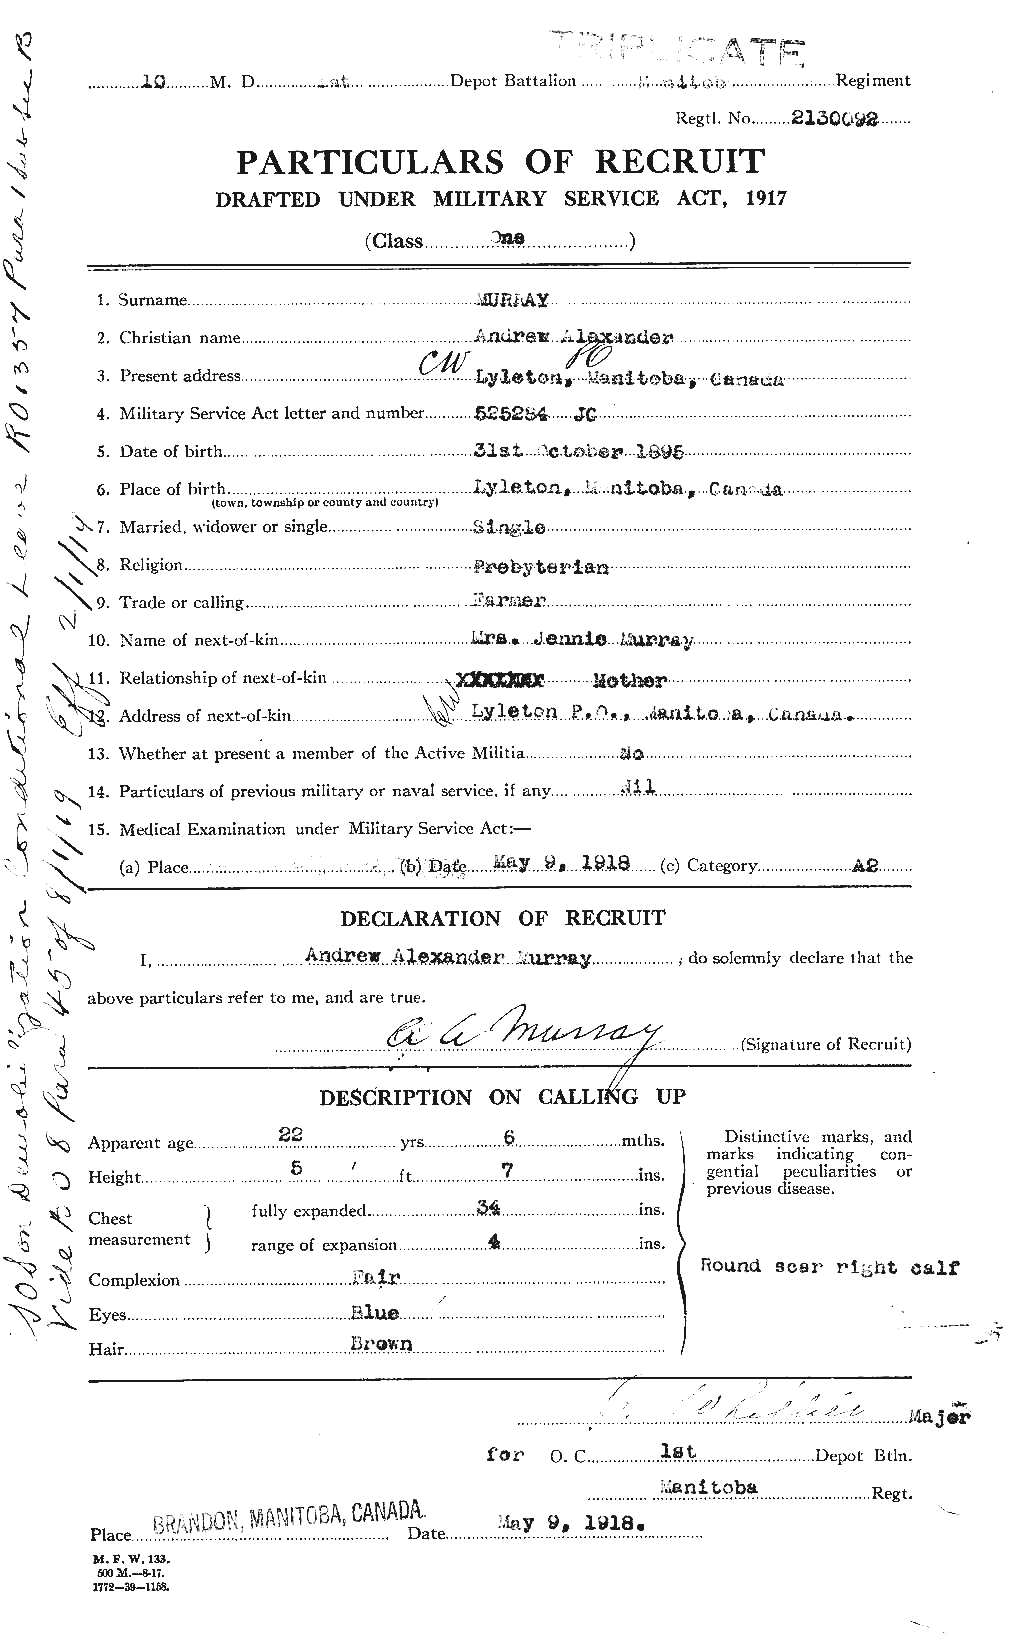 Personnel Records of the First World War - CEF 512463a